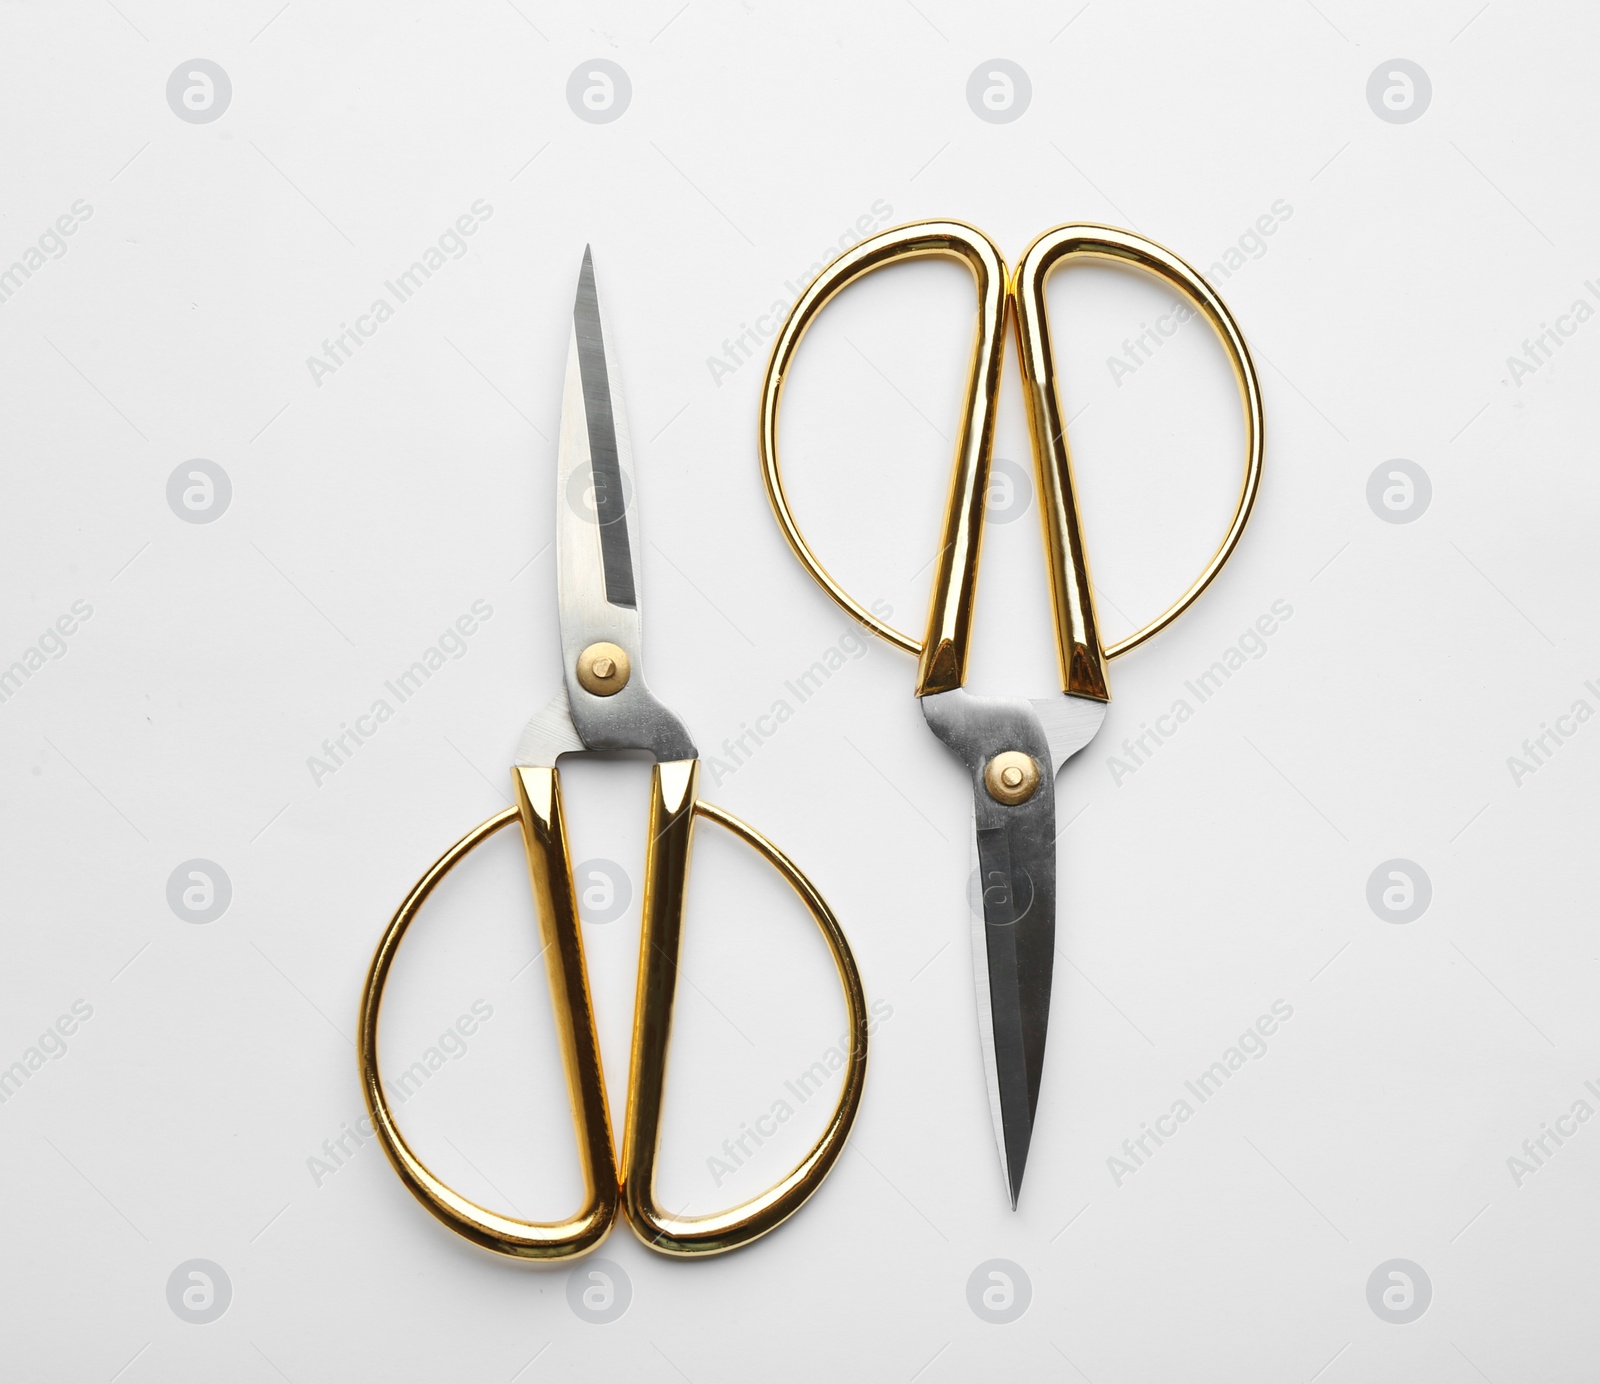 Photo of Scissors with golden handles on white background, top view